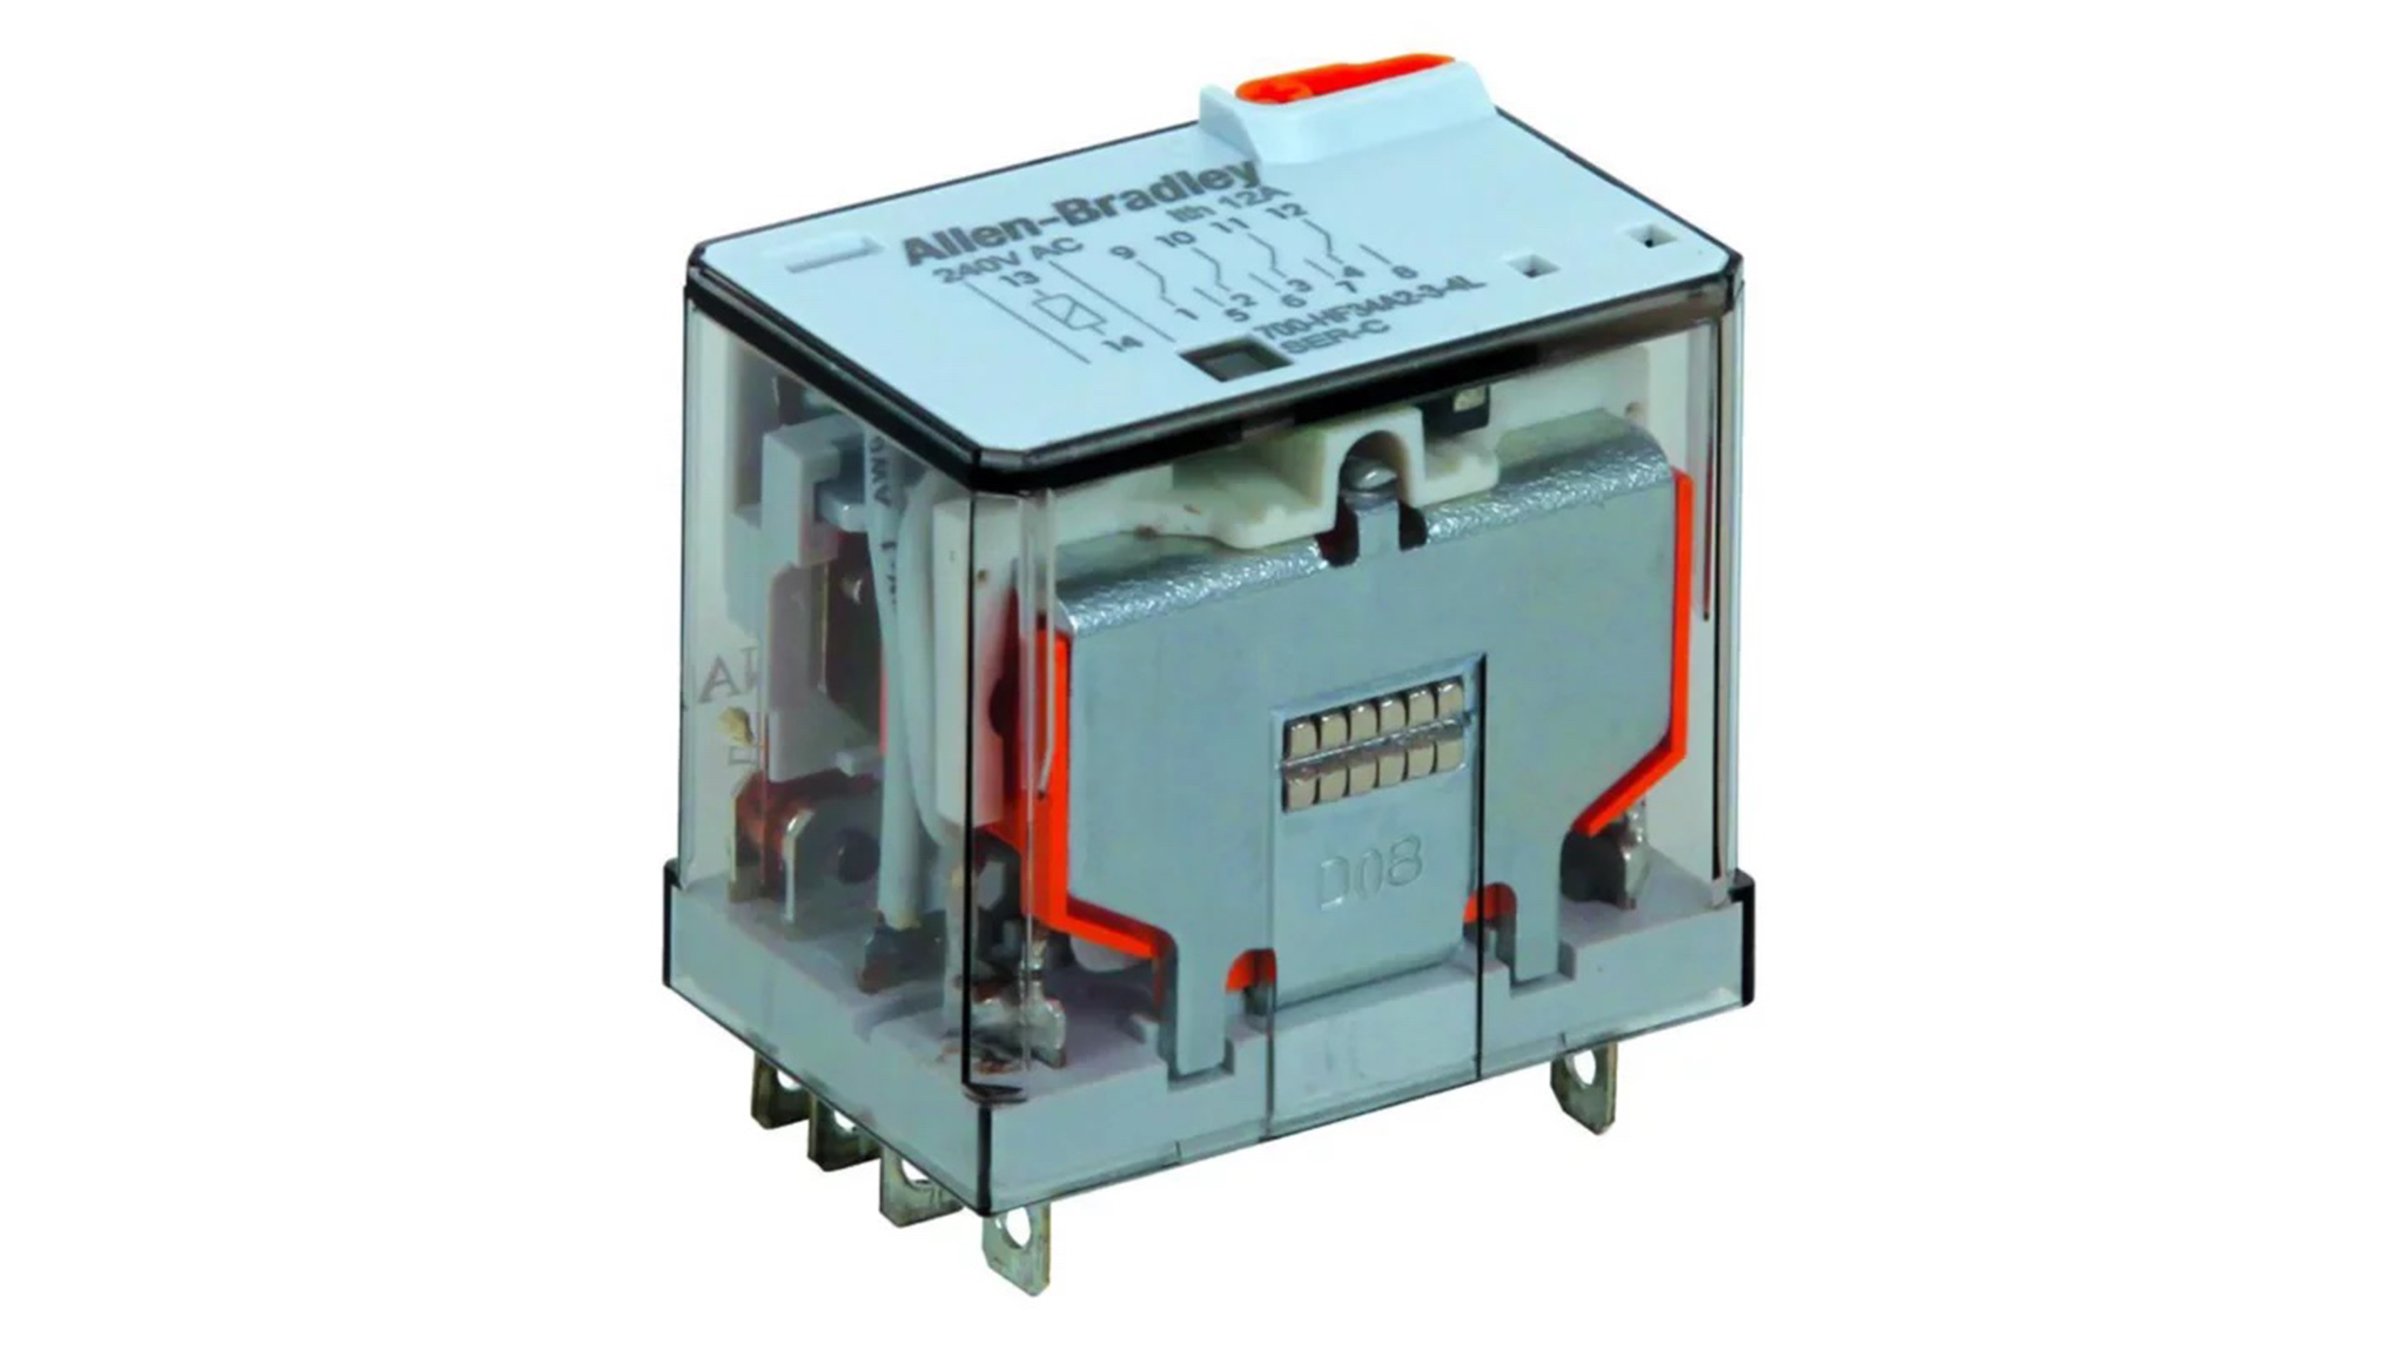 Allen-Bradley 700-HF Miniature Square Base Relays are ideal for automotive applications.